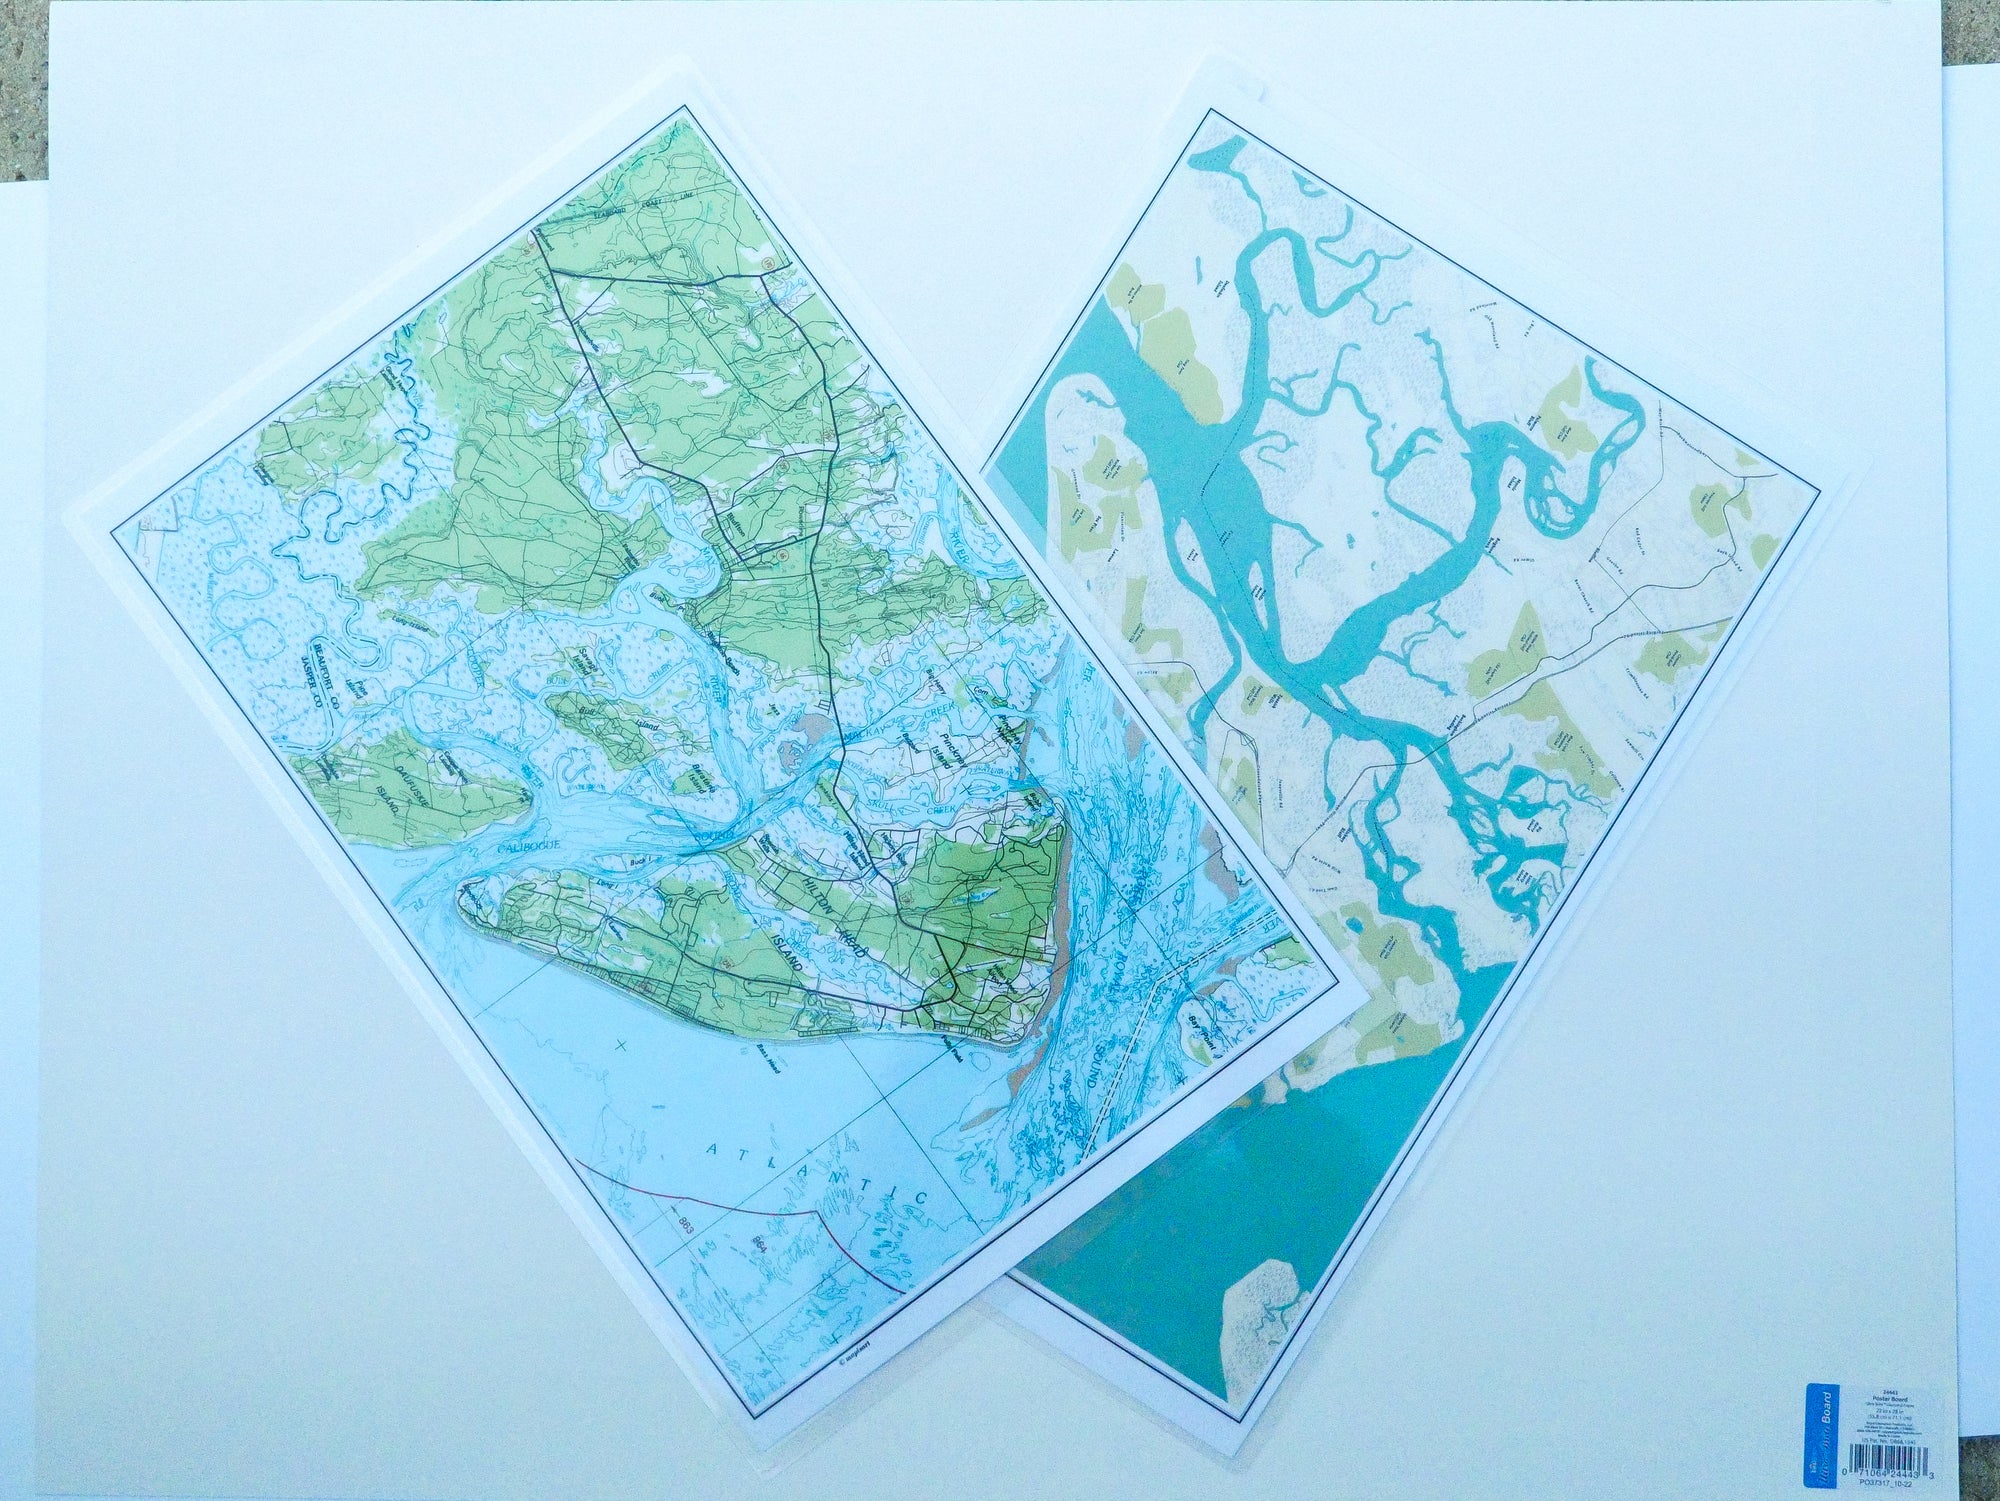 Laminated Placemat w/ Map Of Hilton Head Island